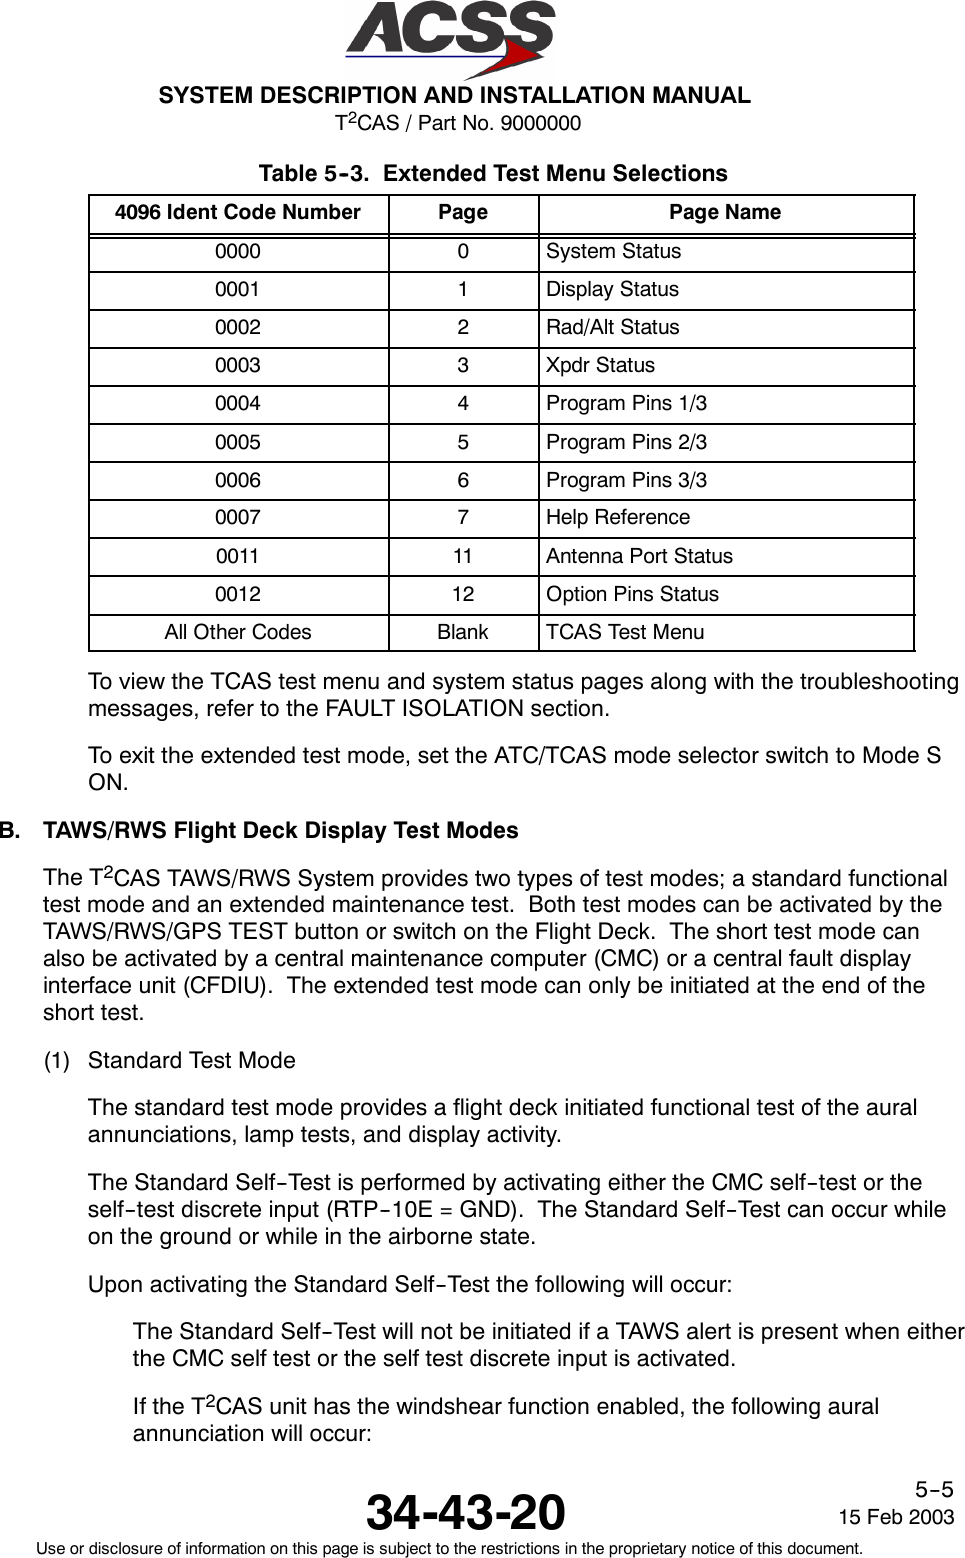 T2CAS / Part No. 9000000SYSTEM DESCRIPTION AND INSTALLATION MANUAL34-43-20 15 Feb 2003Use or disclosure of information on this page is subject to the restrictions in the proprietary notice of this document.5--5Table 5--3. Extended Test Menu Selections4096 Ident Code Number Page Page Name0000 0System Status0001 1Display Status0002 2Rad/Alt Status0003 3Xpdr Status0004 4Program Pins 1/30005 5Program Pins 2/30006 6Program Pins 3/30007 7Help Reference0011 11 Antenna Port Status0012 12 Option Pins StatusAll Other Codes Blank TCAS Test MenuTo view the TCAS test menu and system status pages along with the troubleshootingmessages, refer to the FAULT ISOLATION section.To exit the extended test mode, set the ATC/TCAS mode selector switch to Mode SON.B. TAWS/RWS Flight Deck Display Test ModesThe T2CAS TAWS/RWS System provides two types of test modes; a standard functionaltest mode and an extended maintenance test. Both test modes can be activated by theTAWS/RWS/GPS TEST button or switch on the Flight Deck. The short test mode canalso be activated by a central maintenance computer (CMC) or a central fault displayinterface unit (CFDIU). The extended test mode can only be initiated at the end of theshort test.(1) Standard Test ModeThe standard test mode provides a flight deck initiated functional test of the auralannunciations, lamp tests, and display activity.The Standard Self--Test is performed by activating either the CMC self--test or theself--test discrete input (RTP--10E = GND). The Standard Self--Test can occur whileon the ground or while in the airborne state.Upon activating the Standard Self--Test the following will occur:The Standard Self--Test will not be initiated if a TAWS alert is present when eitherthe CMC self test or the self test discrete input is activated.If the T2CAS unit has the windshear function enabled, the following auralannunciation will occur: